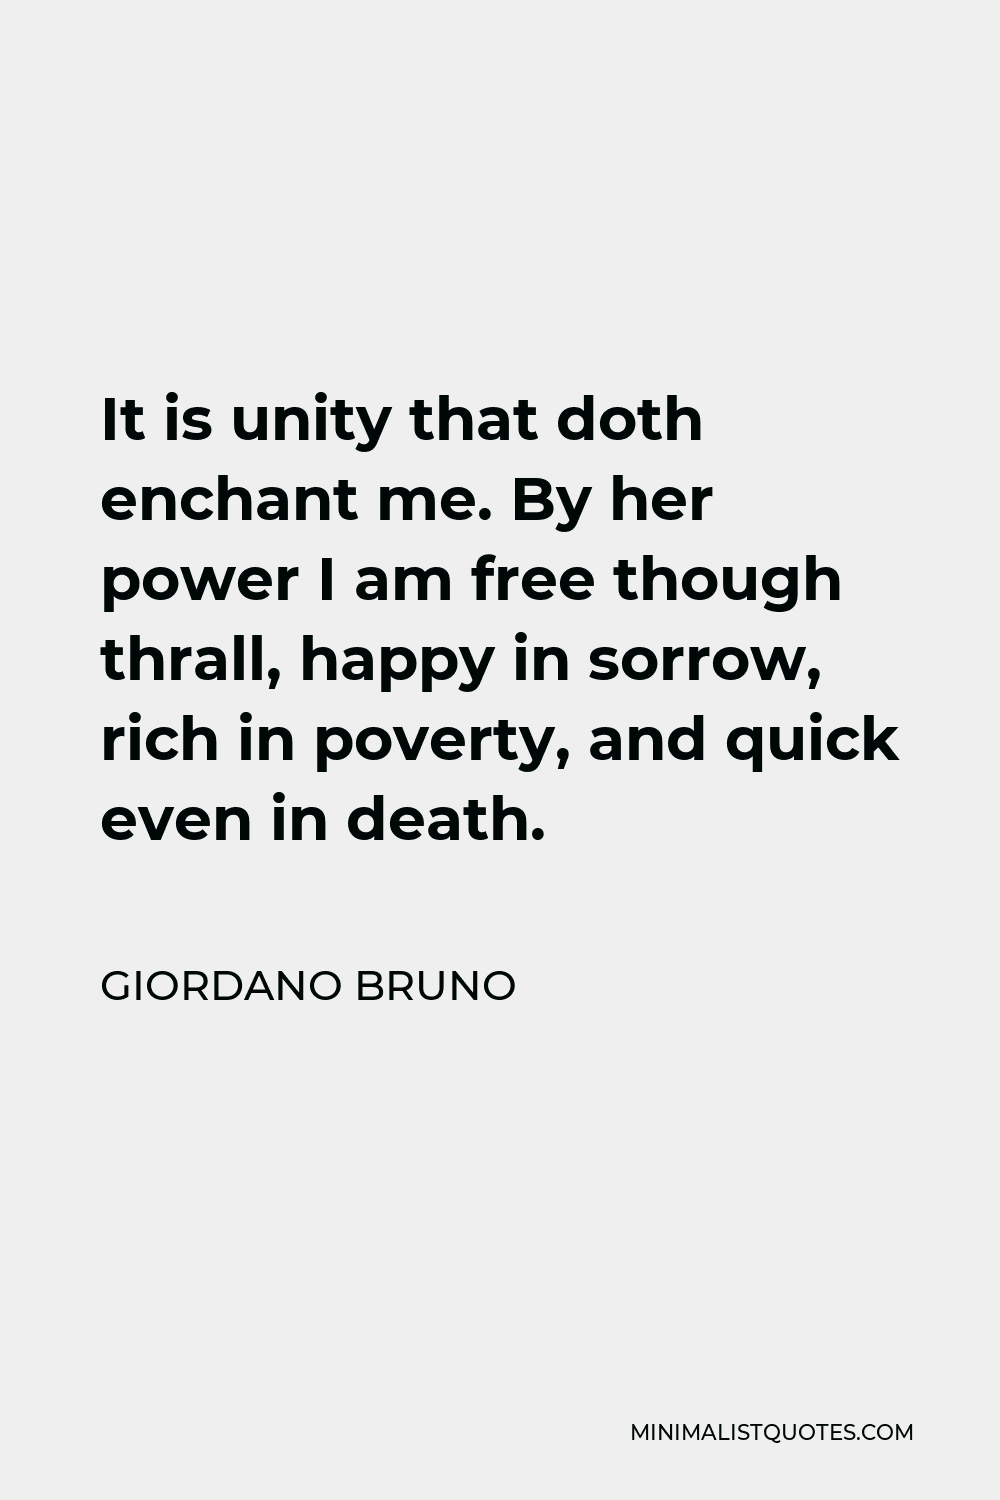 Giordano Bruno Quote - It is unity that doth enchant me. By her power I am free though thrall, happy in sorrow, rich in poverty, and quick even in death.